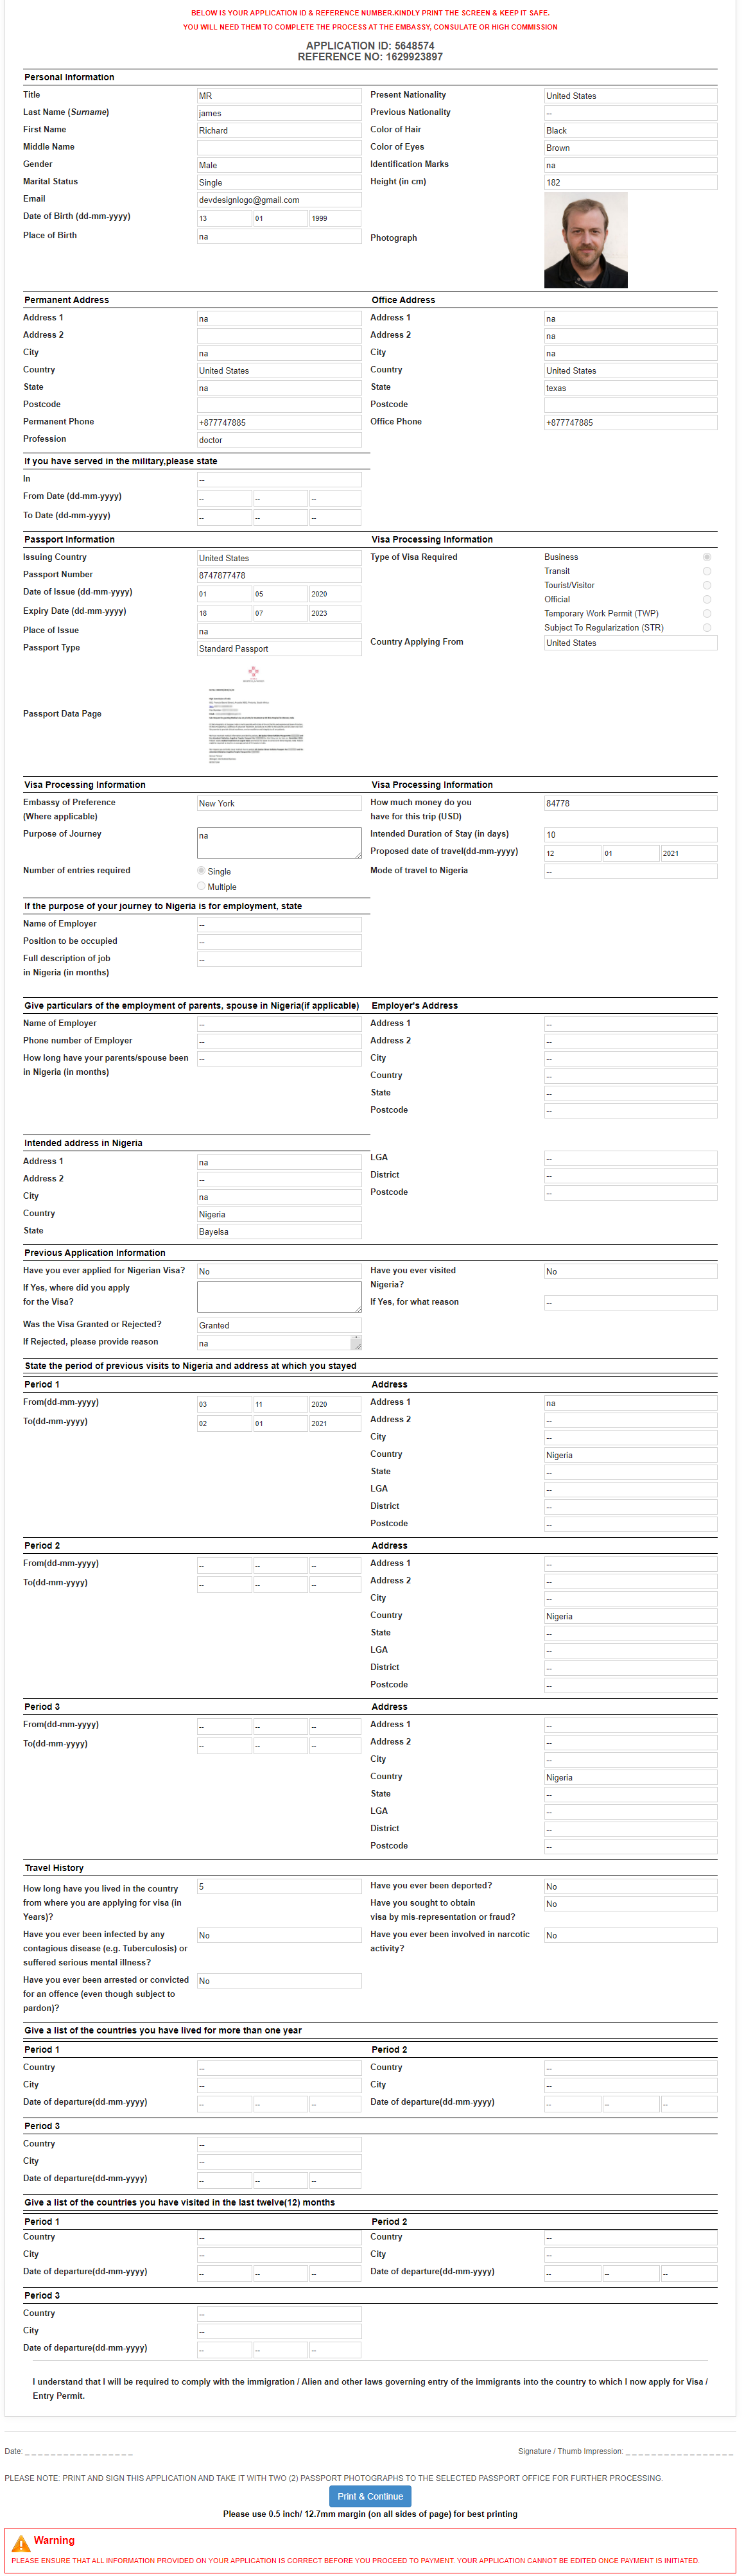 Guide for Requirements to Lodge Application Forms